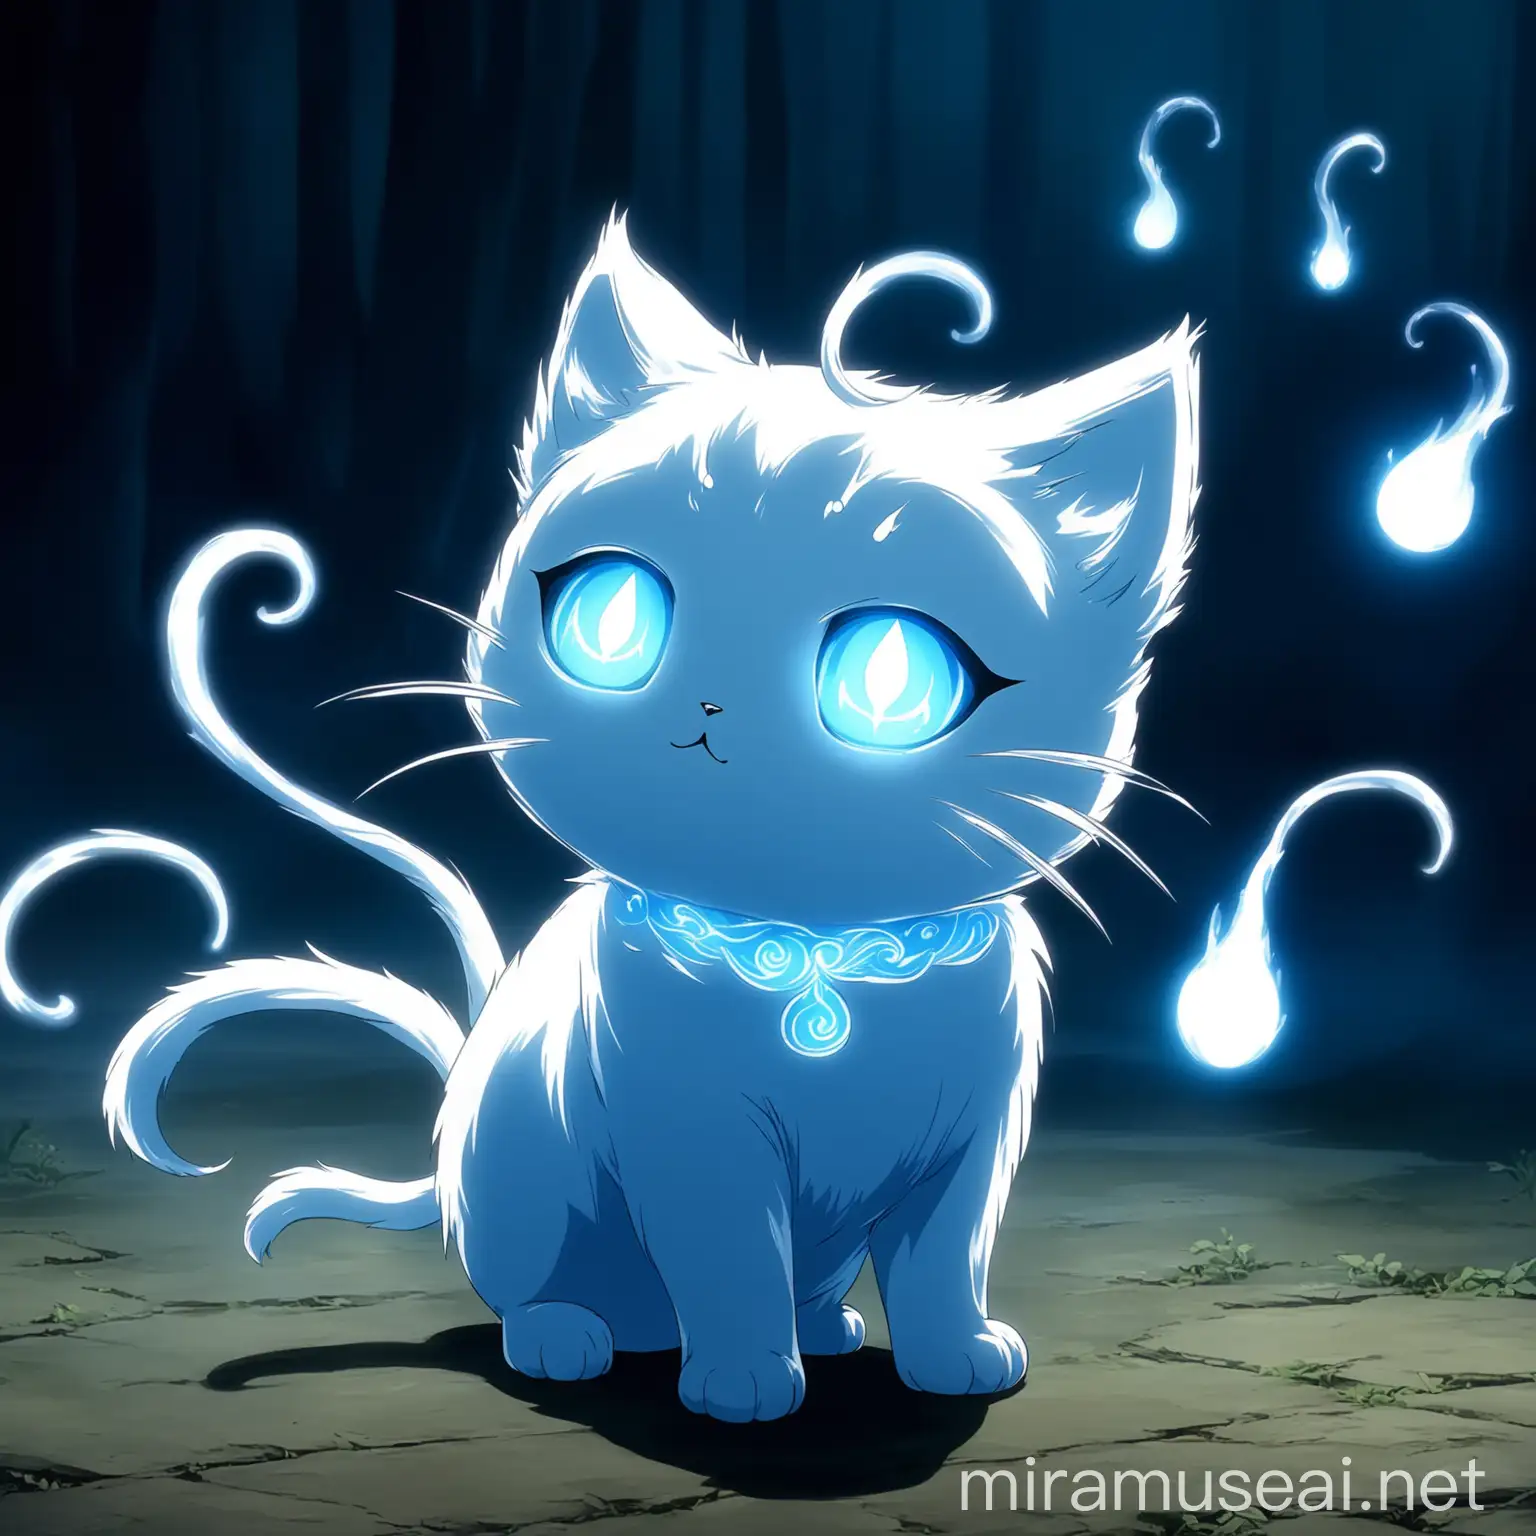 a little fantasy cat made from a white and blue will-o'-the-wisp glowing as if it were a spirit. in anime